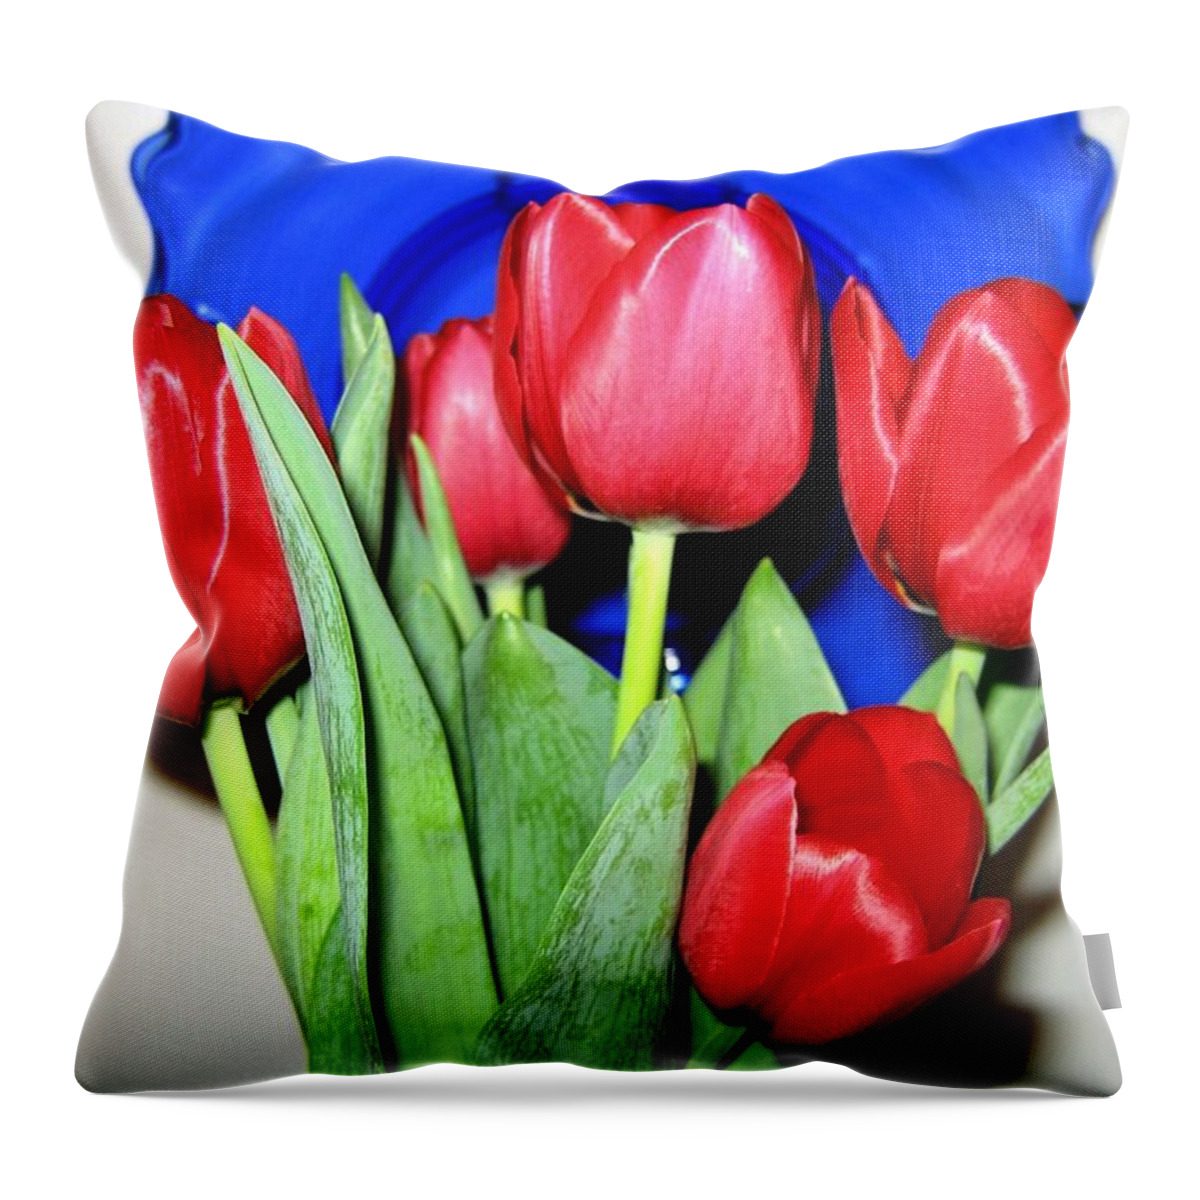 Tulips Throw Pillow featuring the photograph Tulipfest 1 by Will Borden